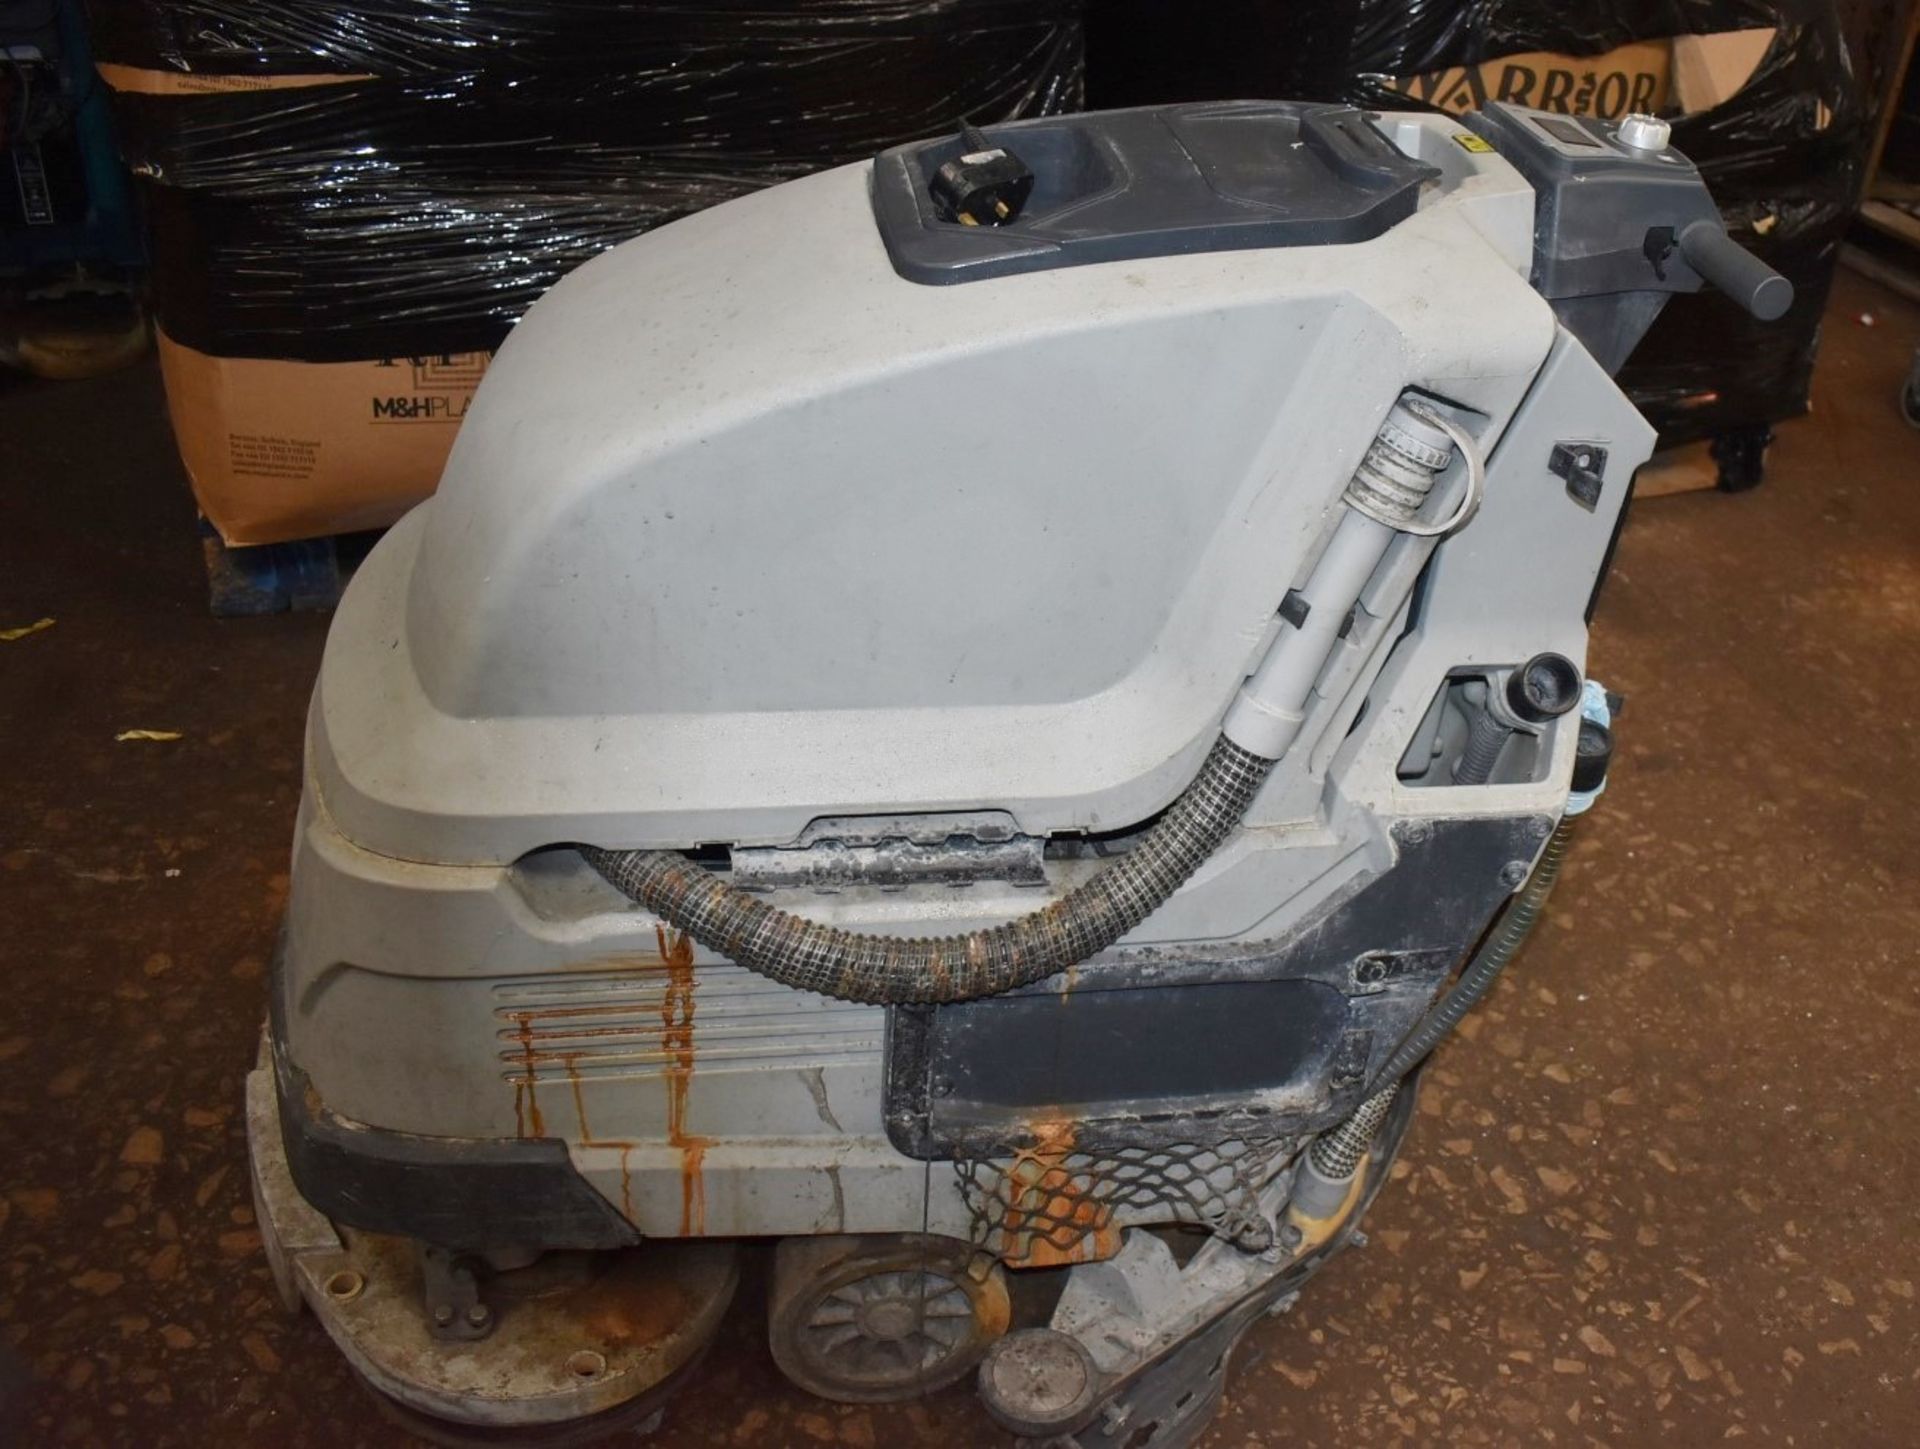 1 x Ice Scrub 65D Commercial Floor Scrubber Dryer - Recently Removed From a Supermarket - Image 6 of 16